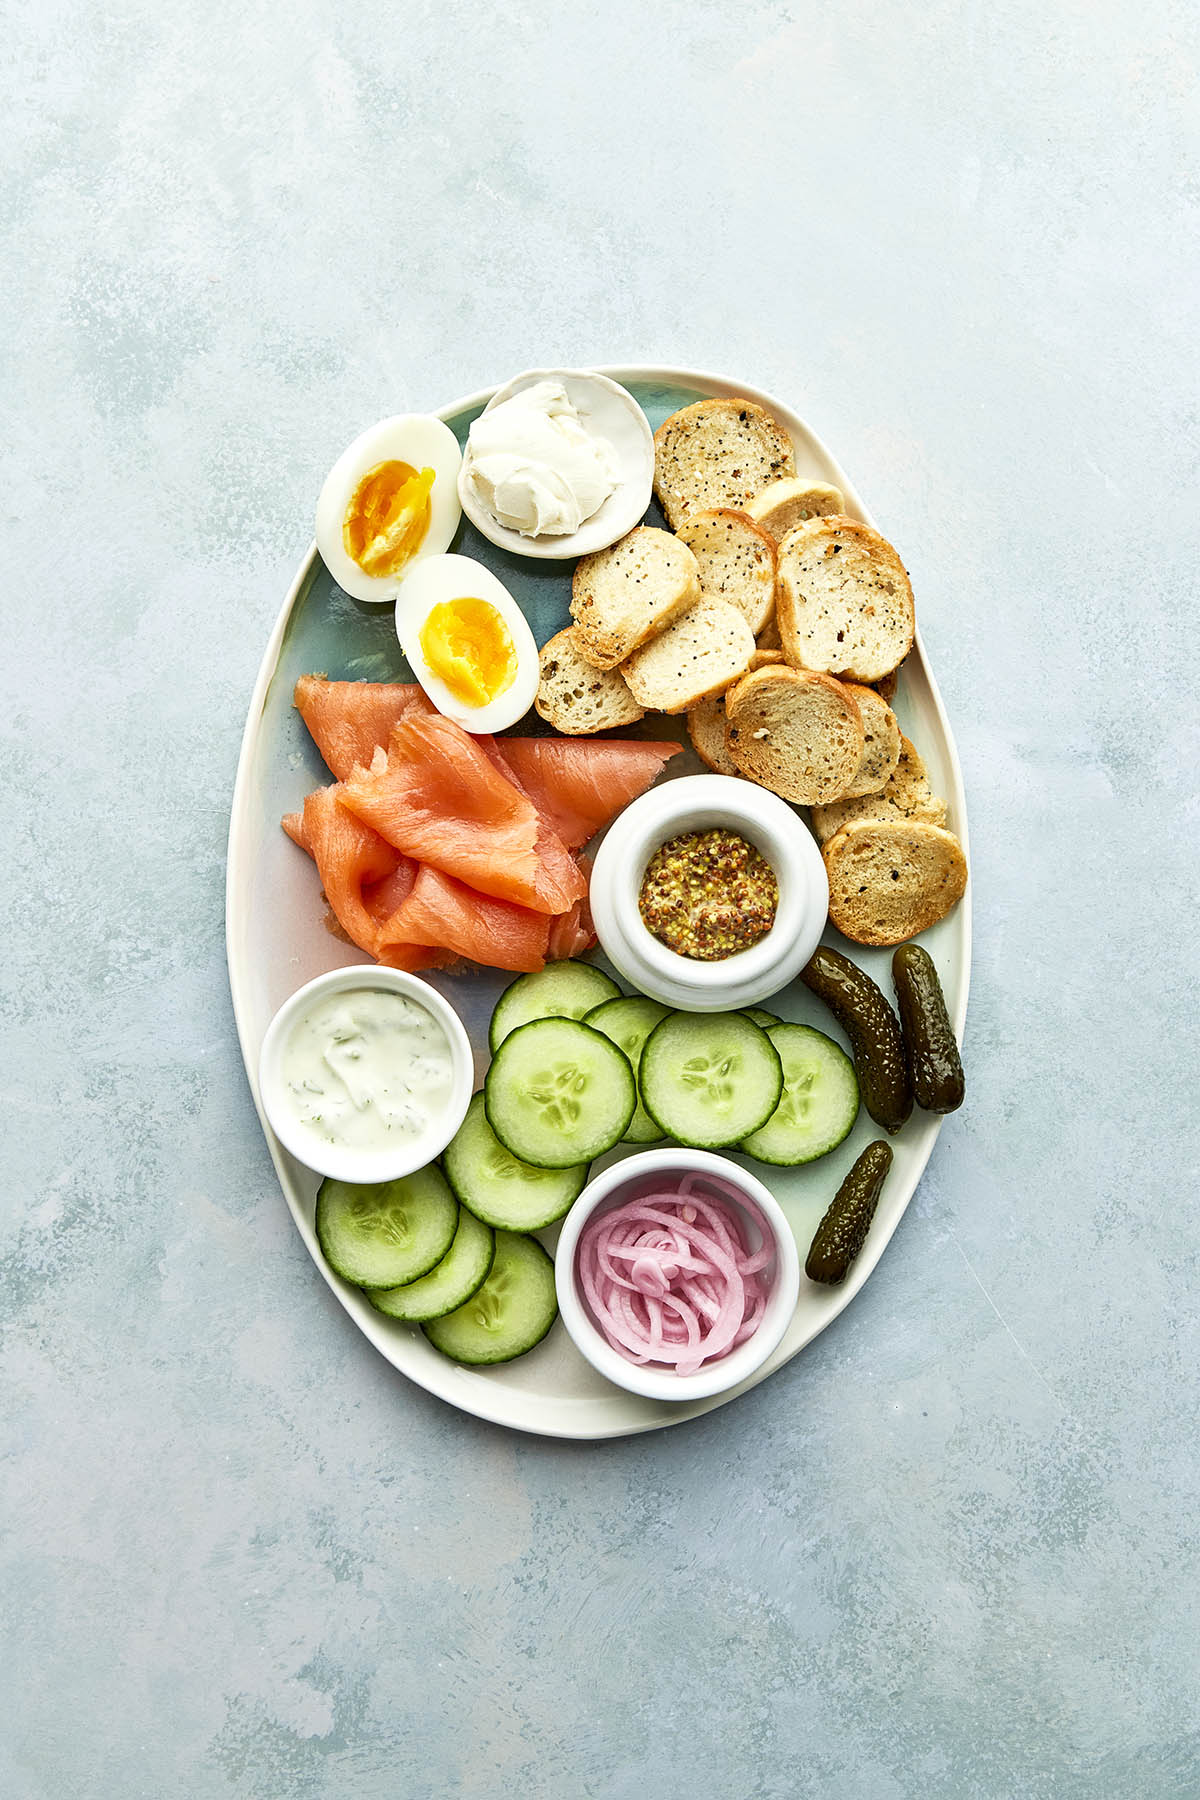 The fourth step of this smoked salmon platter recipe.